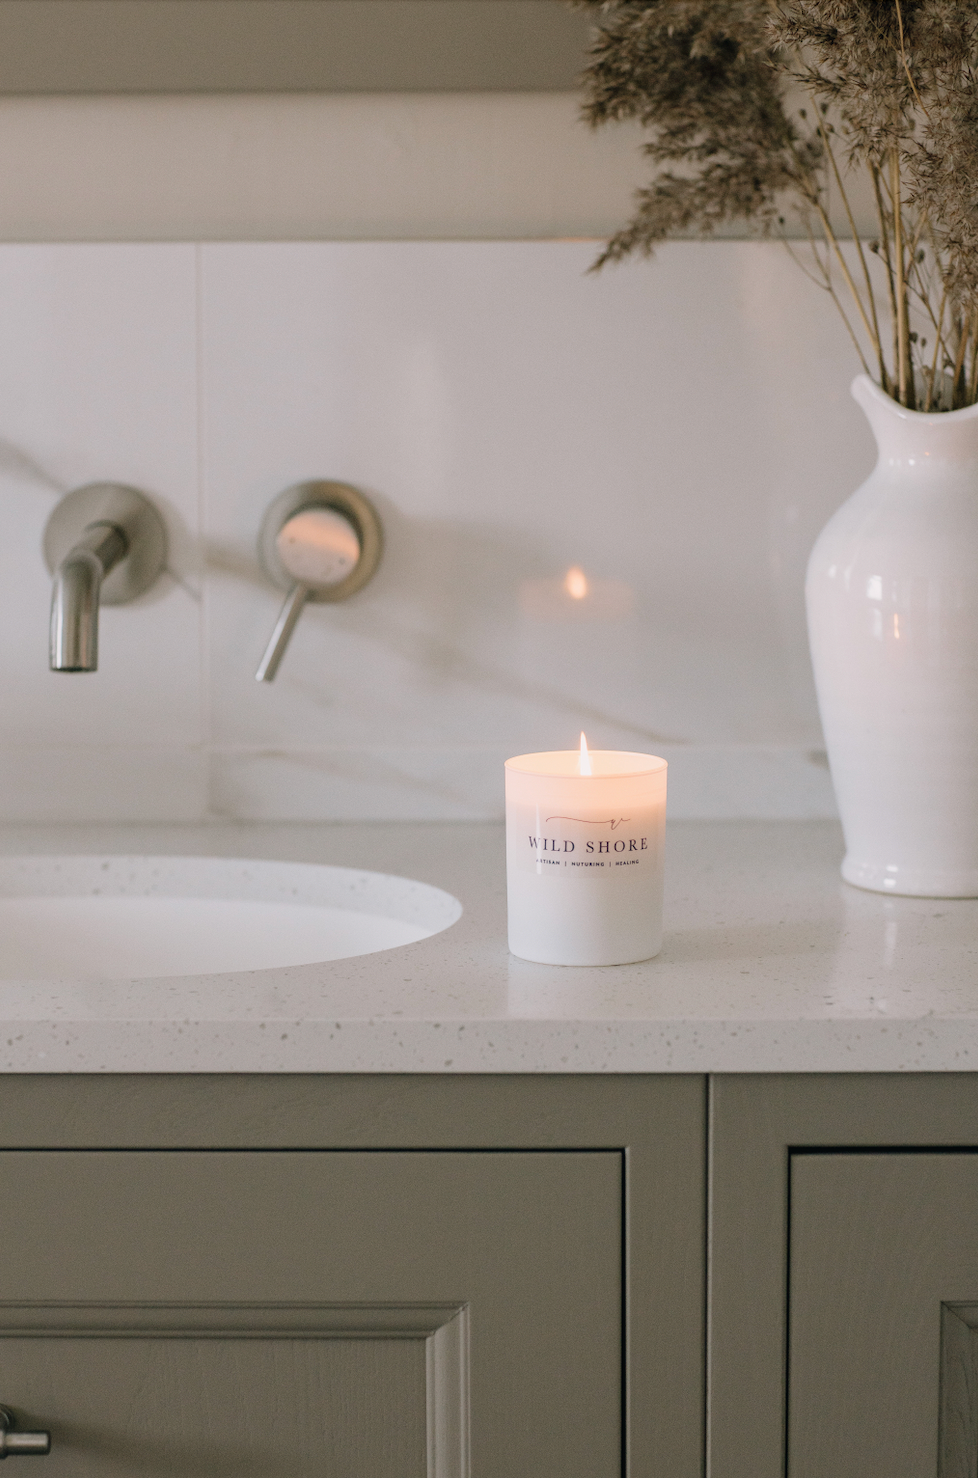 Wild Shore Soy Candle. Frosted matt white branded glass jar. Displayed on a vanity unit in a luxury Bathroom 2